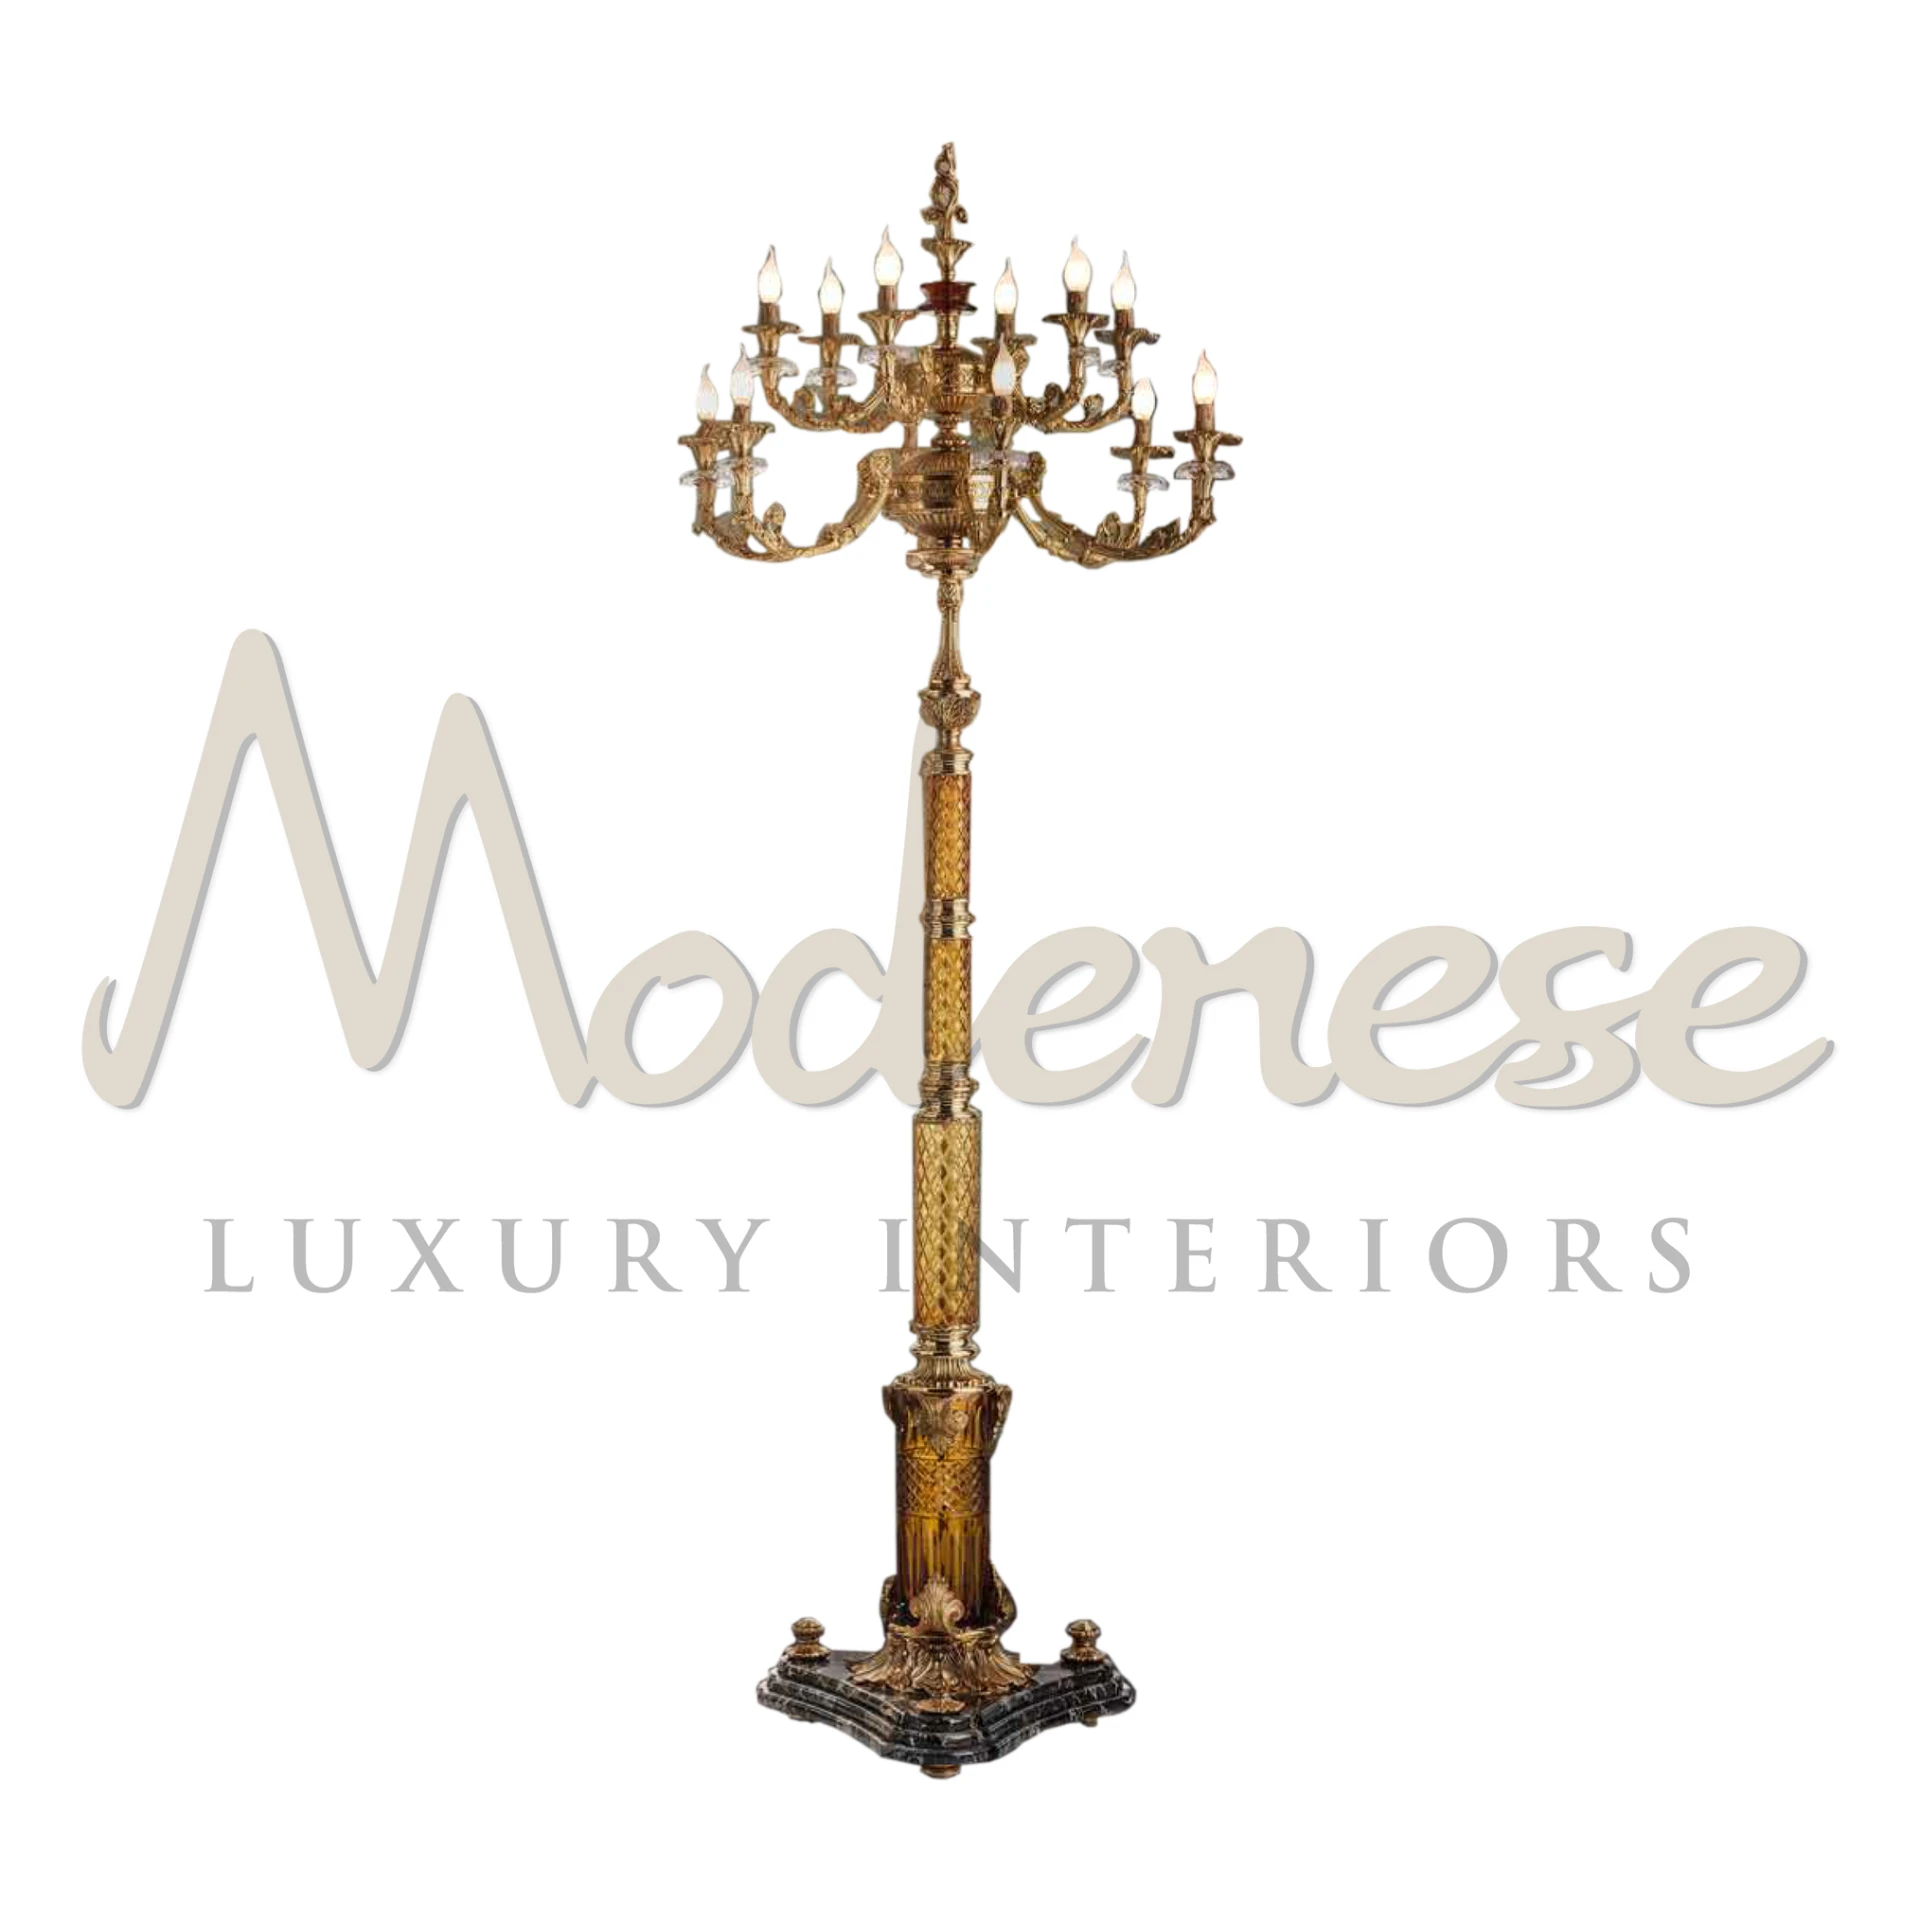 Vintage Torchère with a classic candelabra design and a detailed golden base.